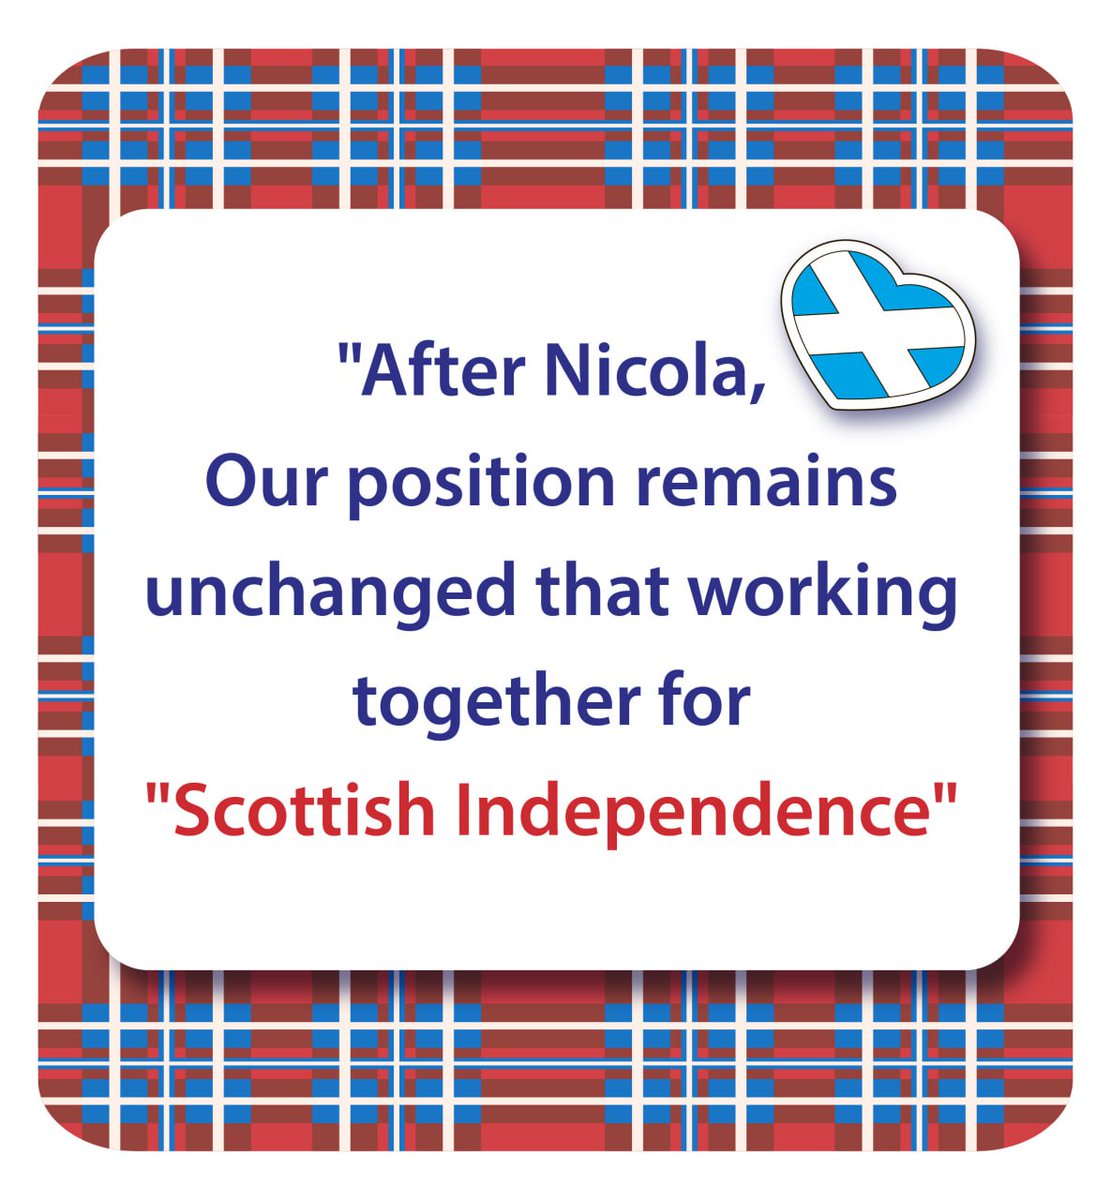 After Nicola,our position remains unchanged that workingtogether for 'Scottish Independence'.
#ScottishIndependence
#scottishindependence2023
#NicolaSturgeon